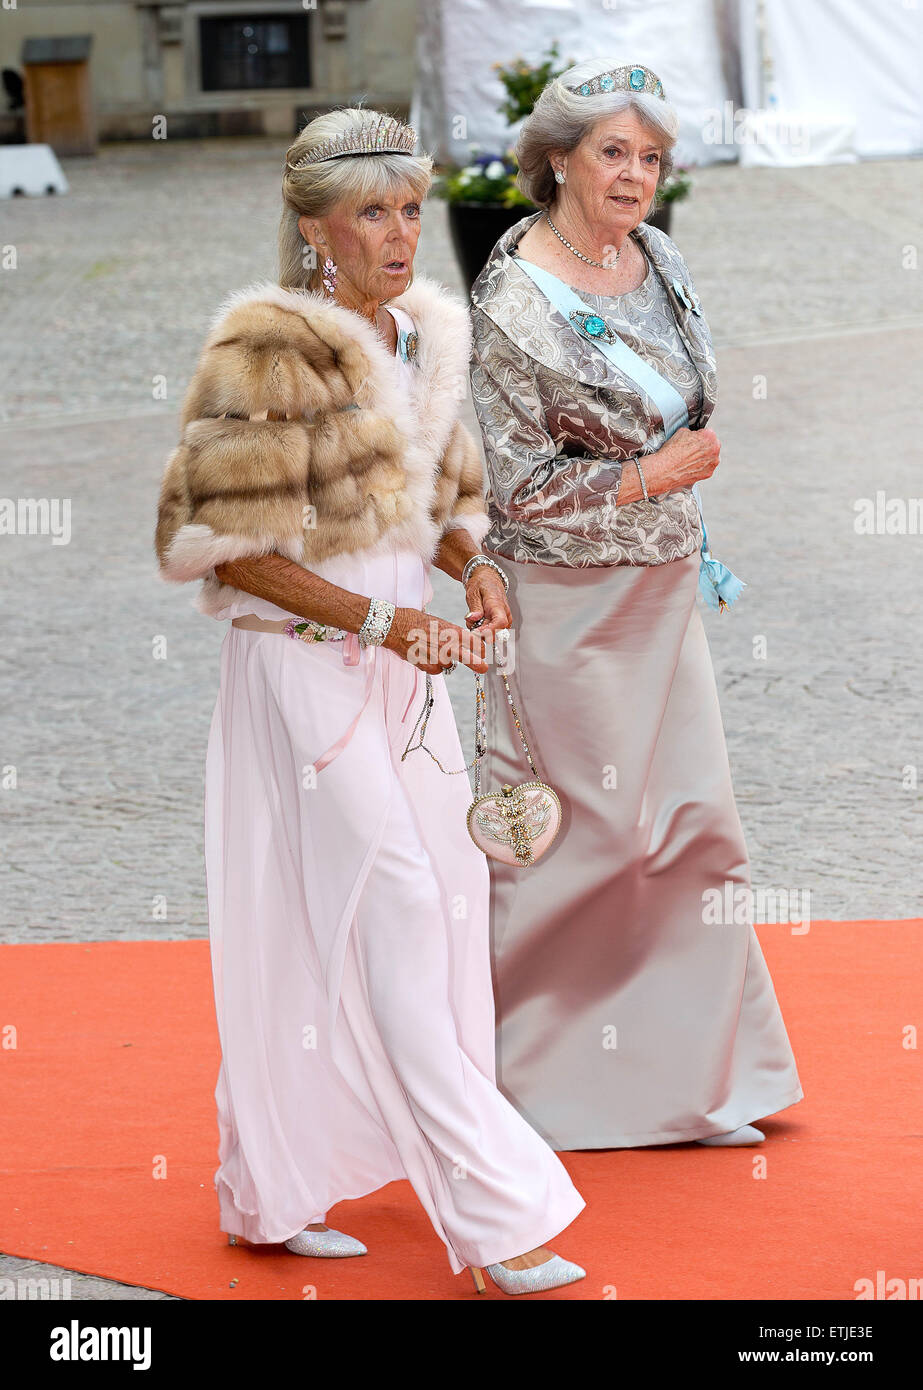 Stockholm, Sweden. 13th June, 2015. Princess Birgitta (L) and Princess Margaretha of Sweden arrive at the Royal Palace for the wedding of Prince Carl Philip and Sofia Hellqvist at the Palace Chapel in Stockholm, Sweden, 13 June 2015. Photo: Albert Nieboer/RPE/ - NO WIRE SERVICE -/dpa/Alamy Live News Credit:  dpa picture alliance/Alamy Live News Stock Photo